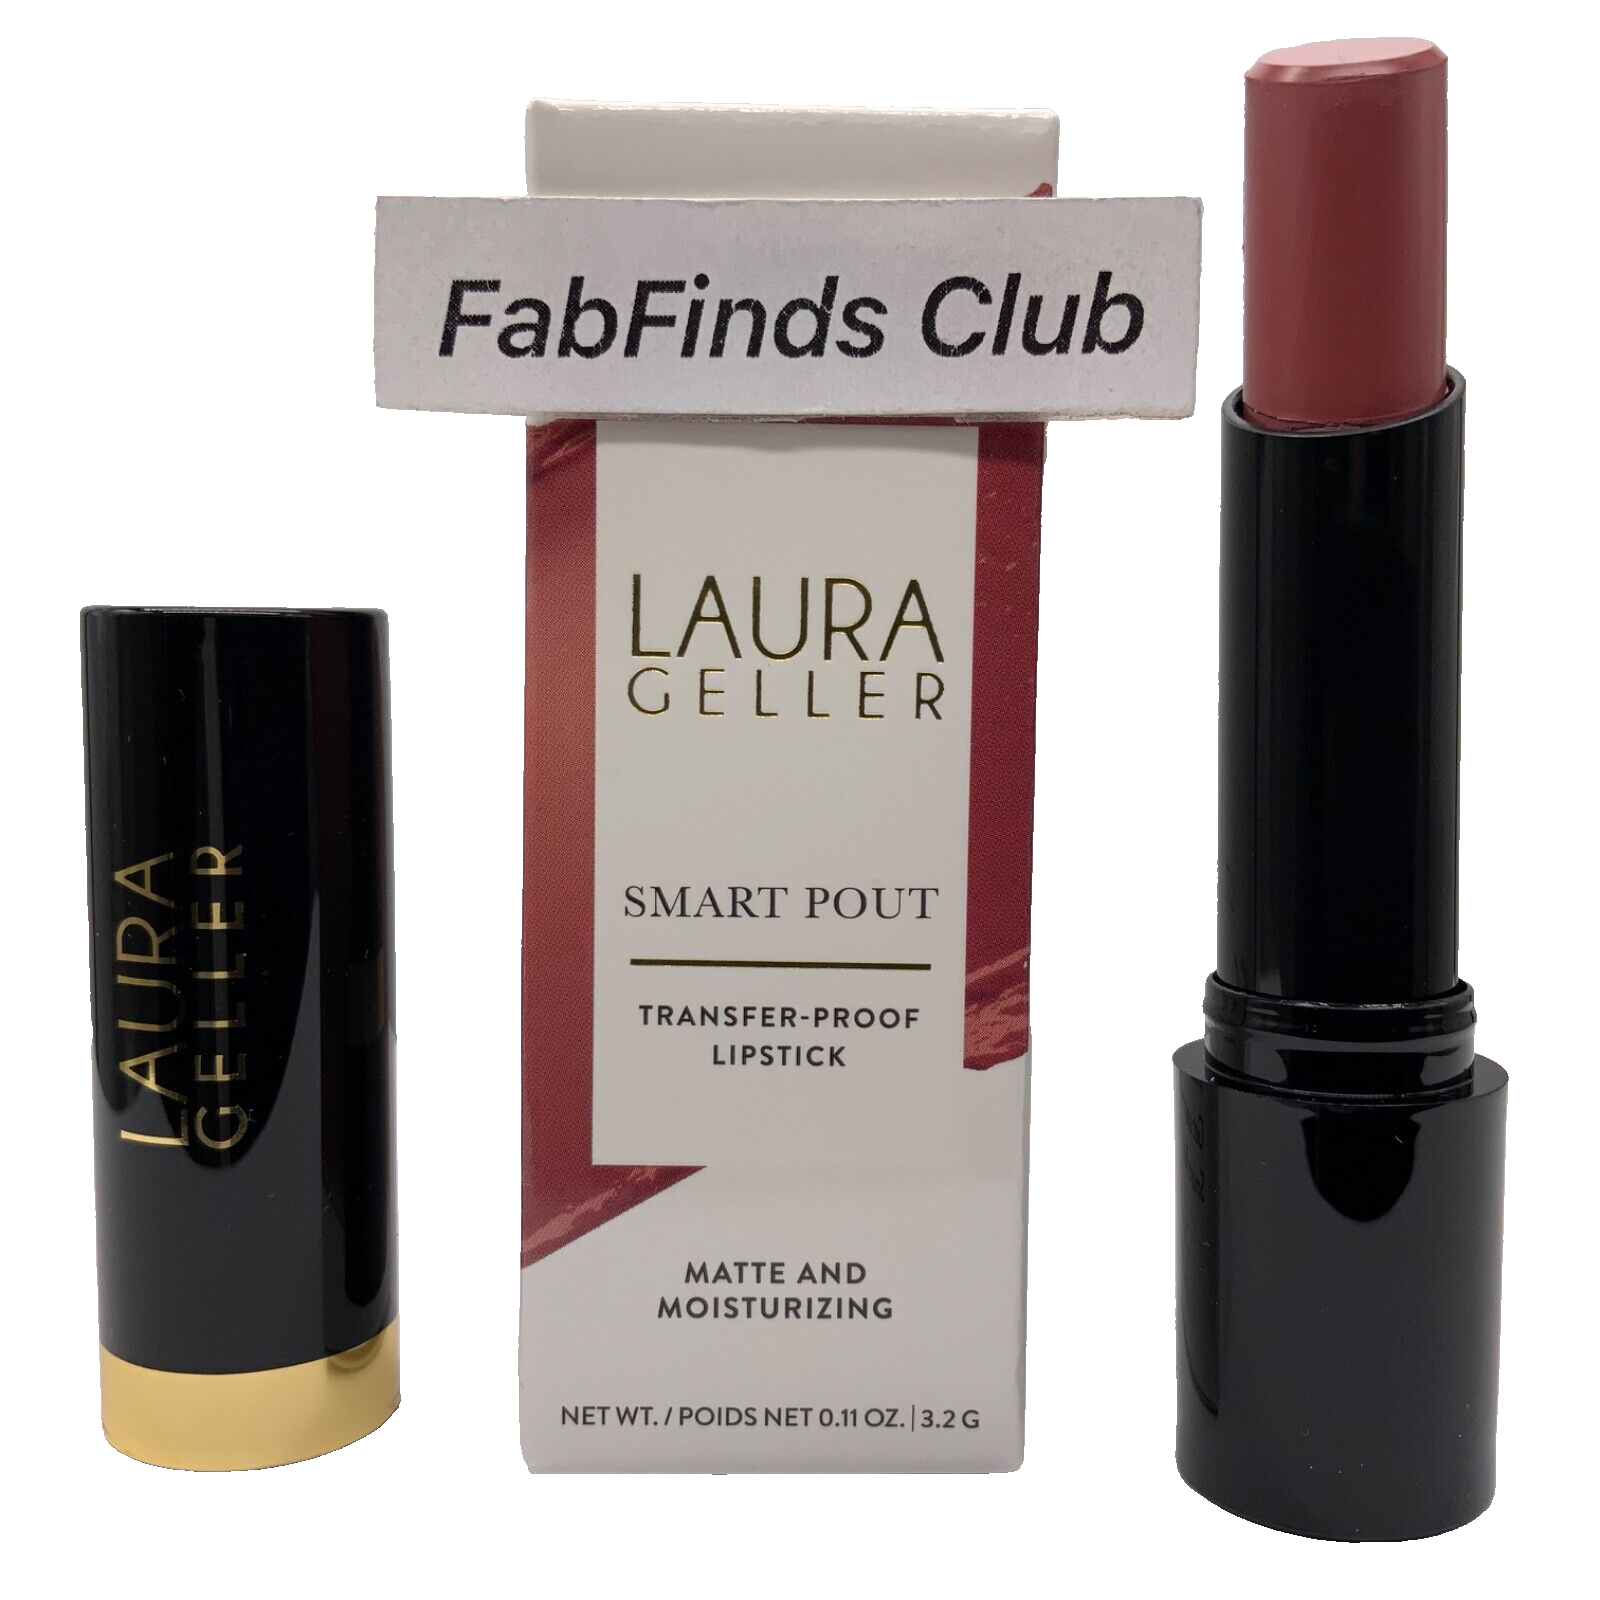 Primary image for Laura Geller Smart Pout Transfer-Proof Lipstick *Witty/Mauve* Matte Moisturizing